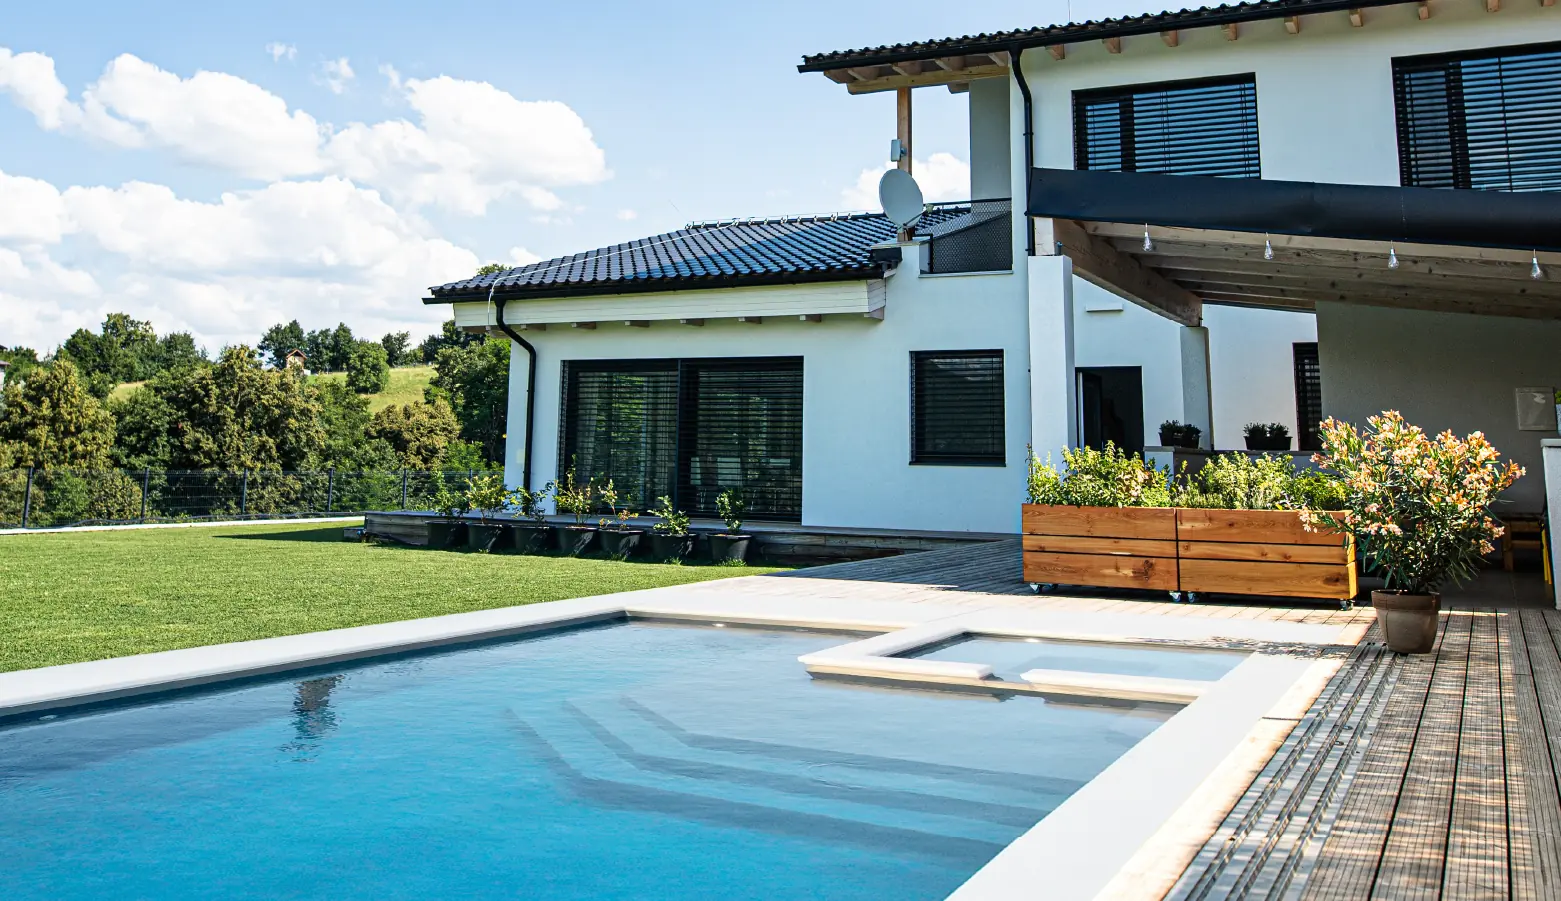 Discover The Luxe: A Masterpiece from Aviva Pools' Fiberglass Pool Collection